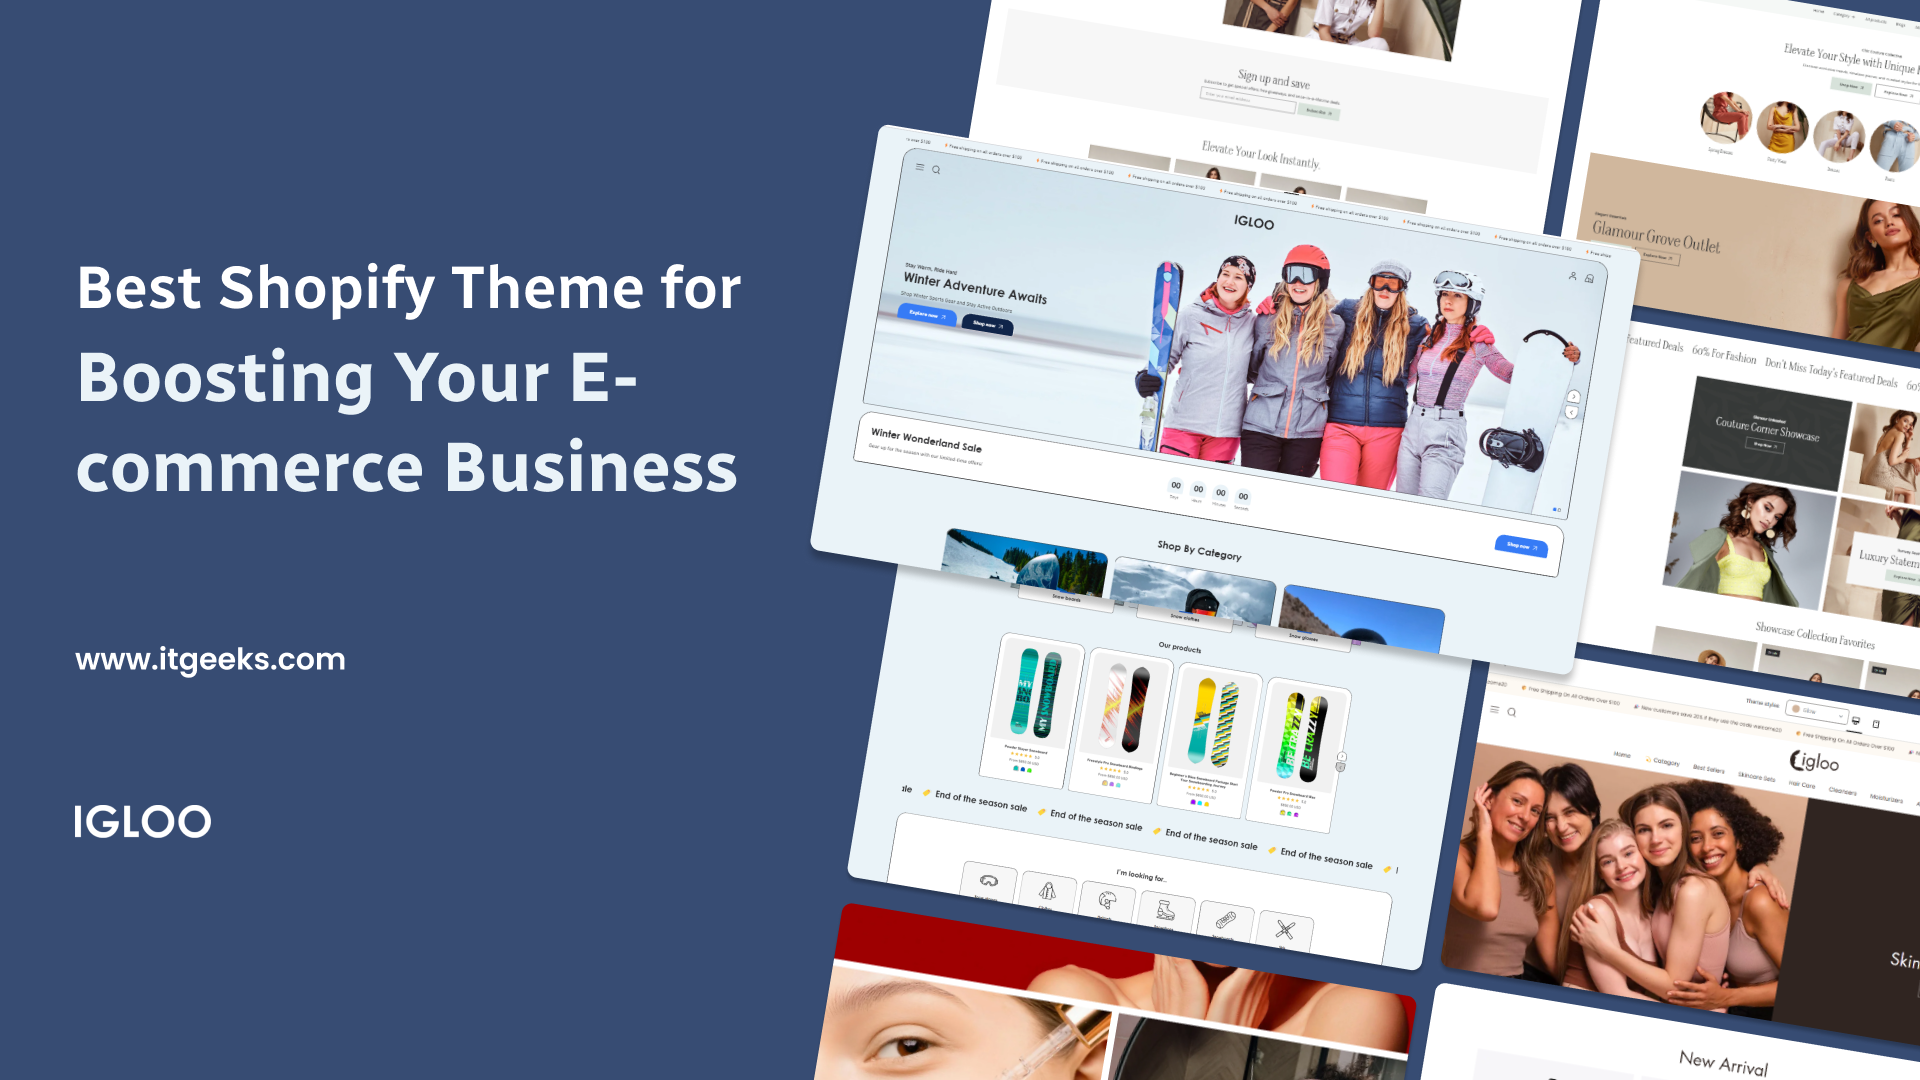 Best Shopify Theme for Boosting Your E-commerce Business